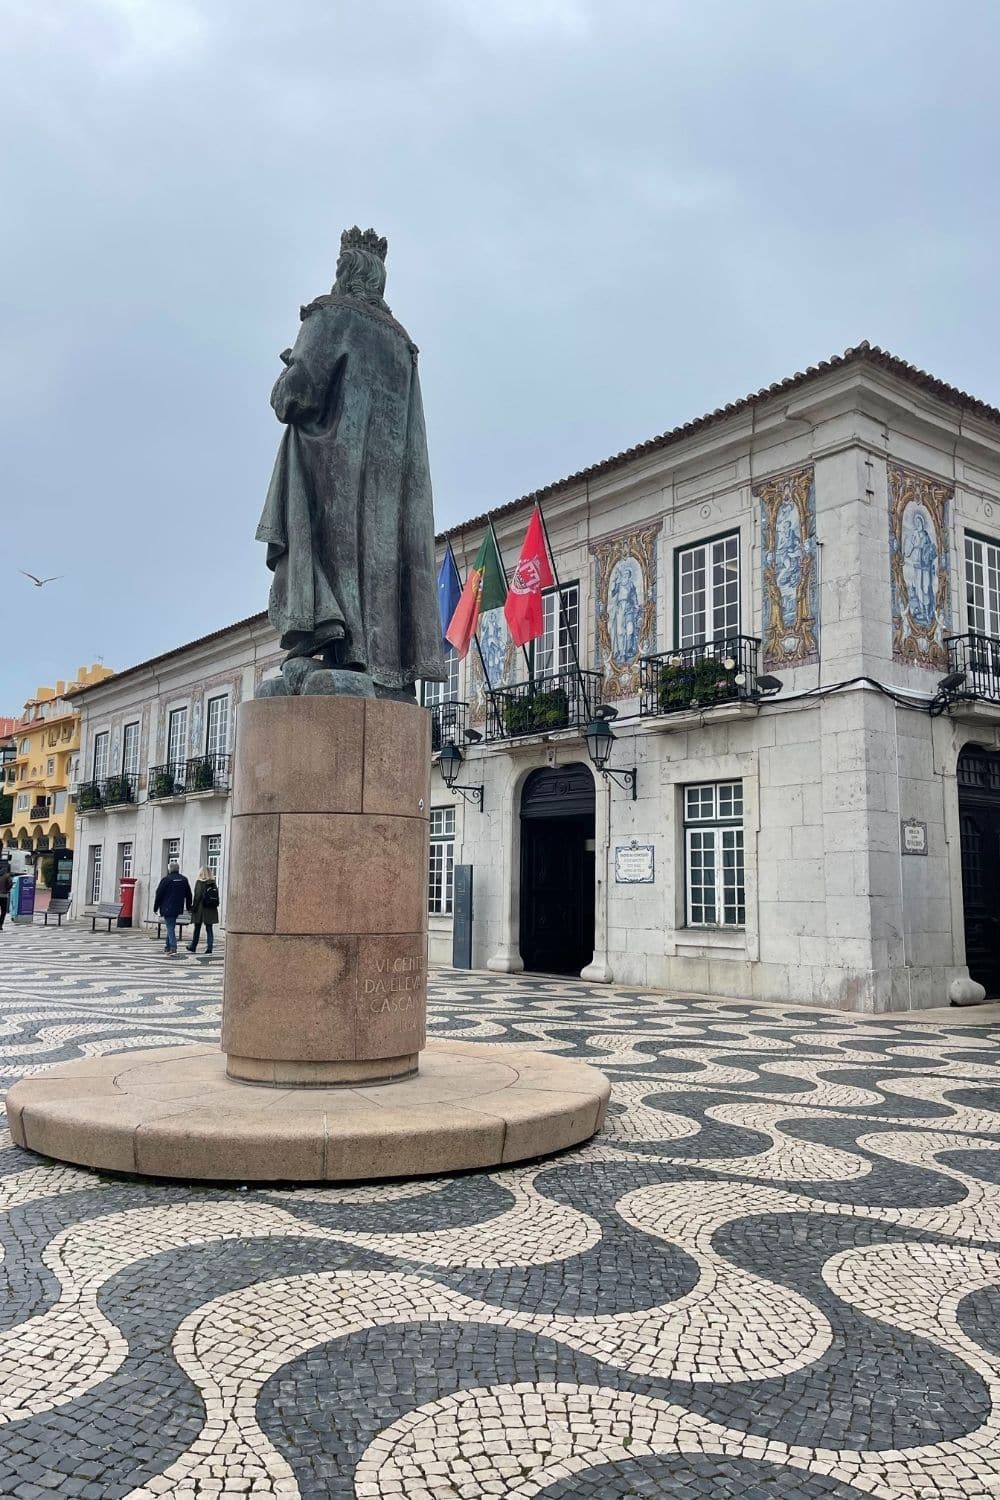 A historical bronze statue of a robed figure, presumably a significant local figure, on a stone pedestal, with an intricate mosaic pavement below. The statue is in a public square flanked by buildings with traditional Portuguese azulejo tiles and flags